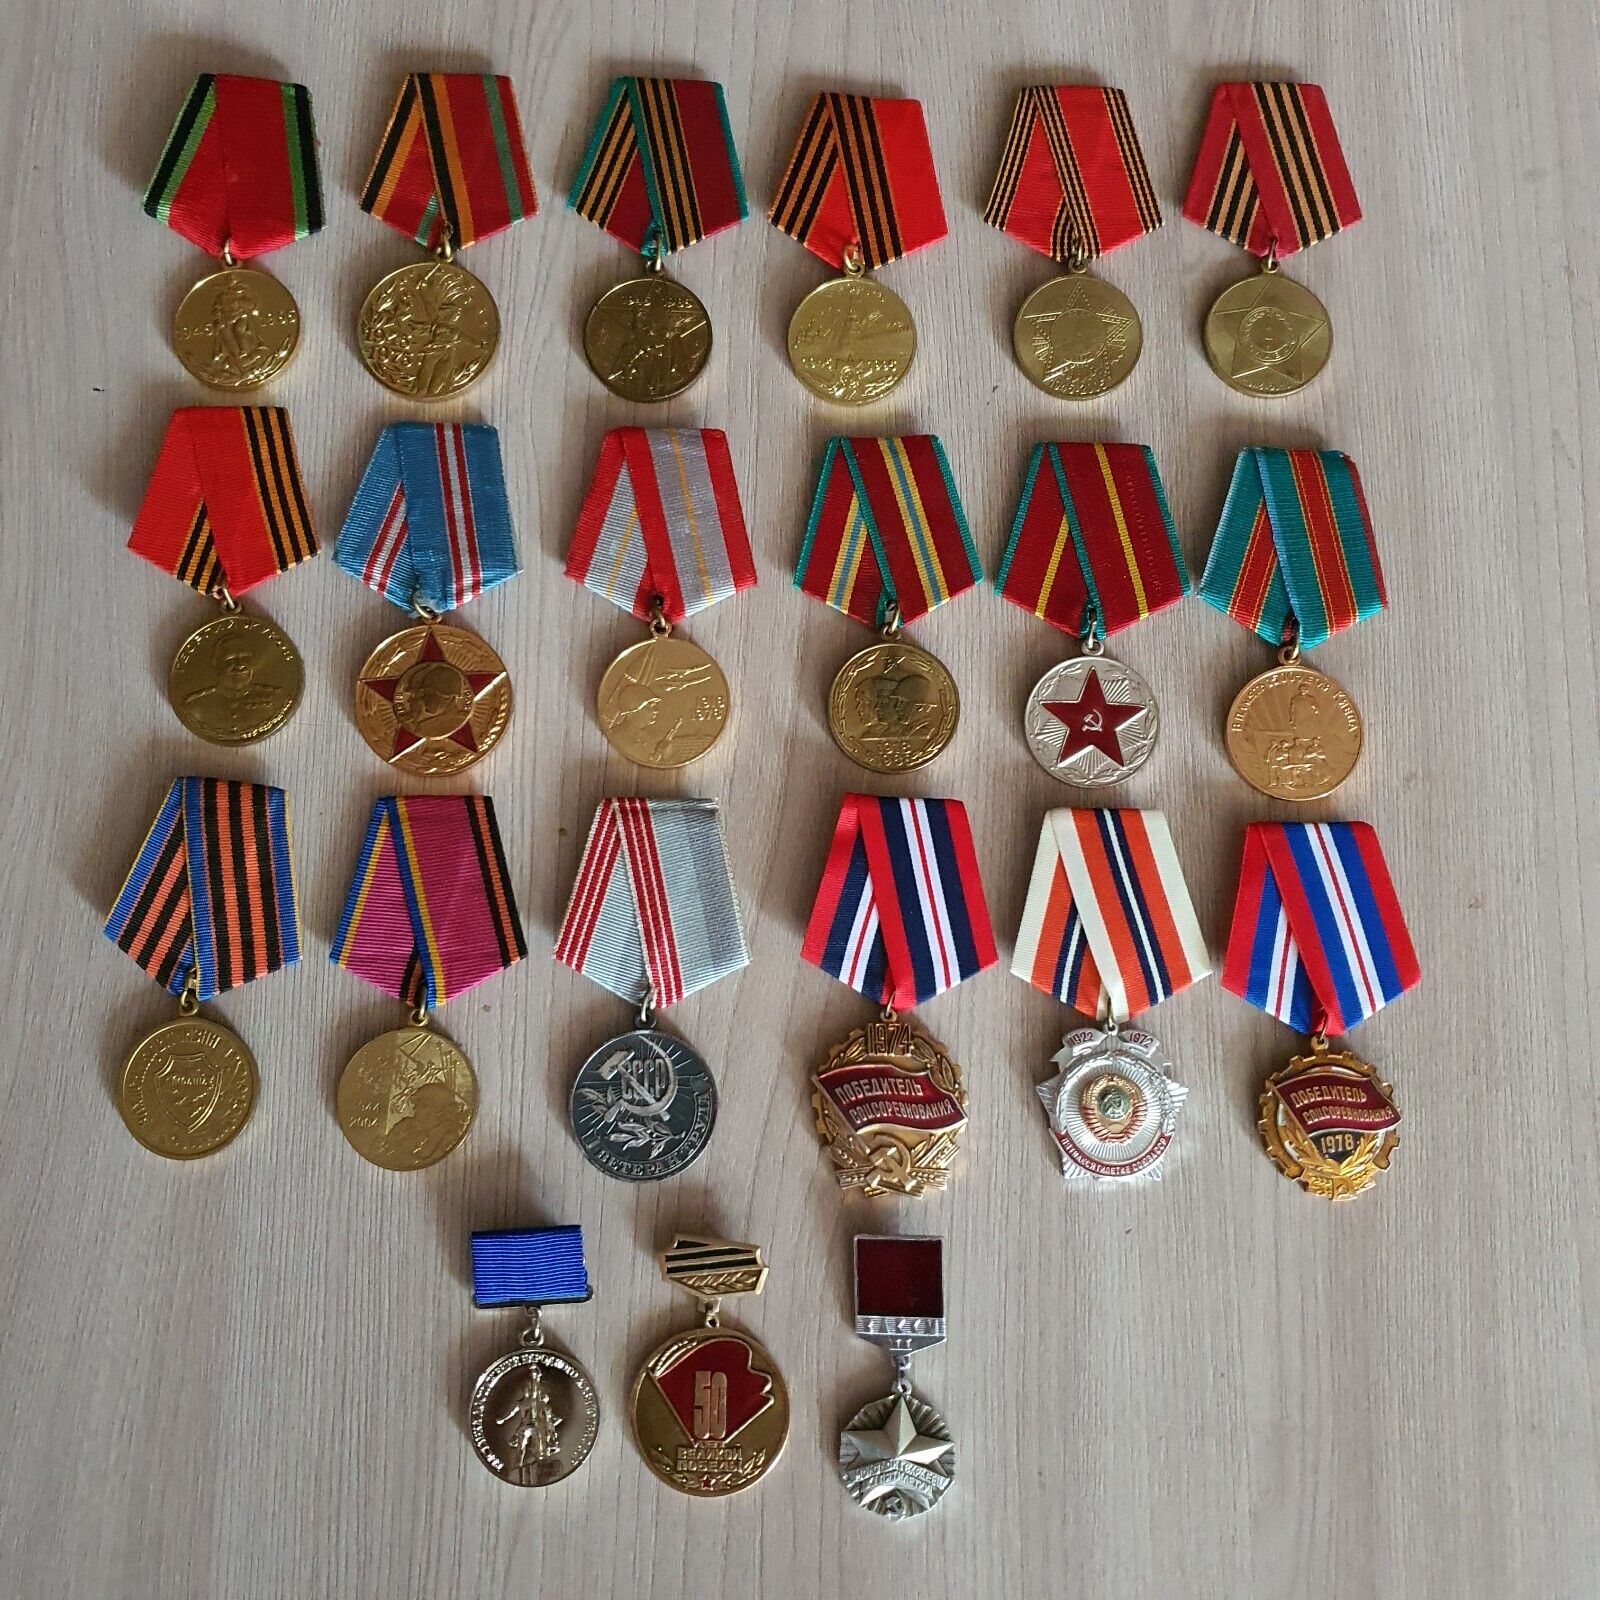 USSR Soviet Union collection 21 medals in good condition